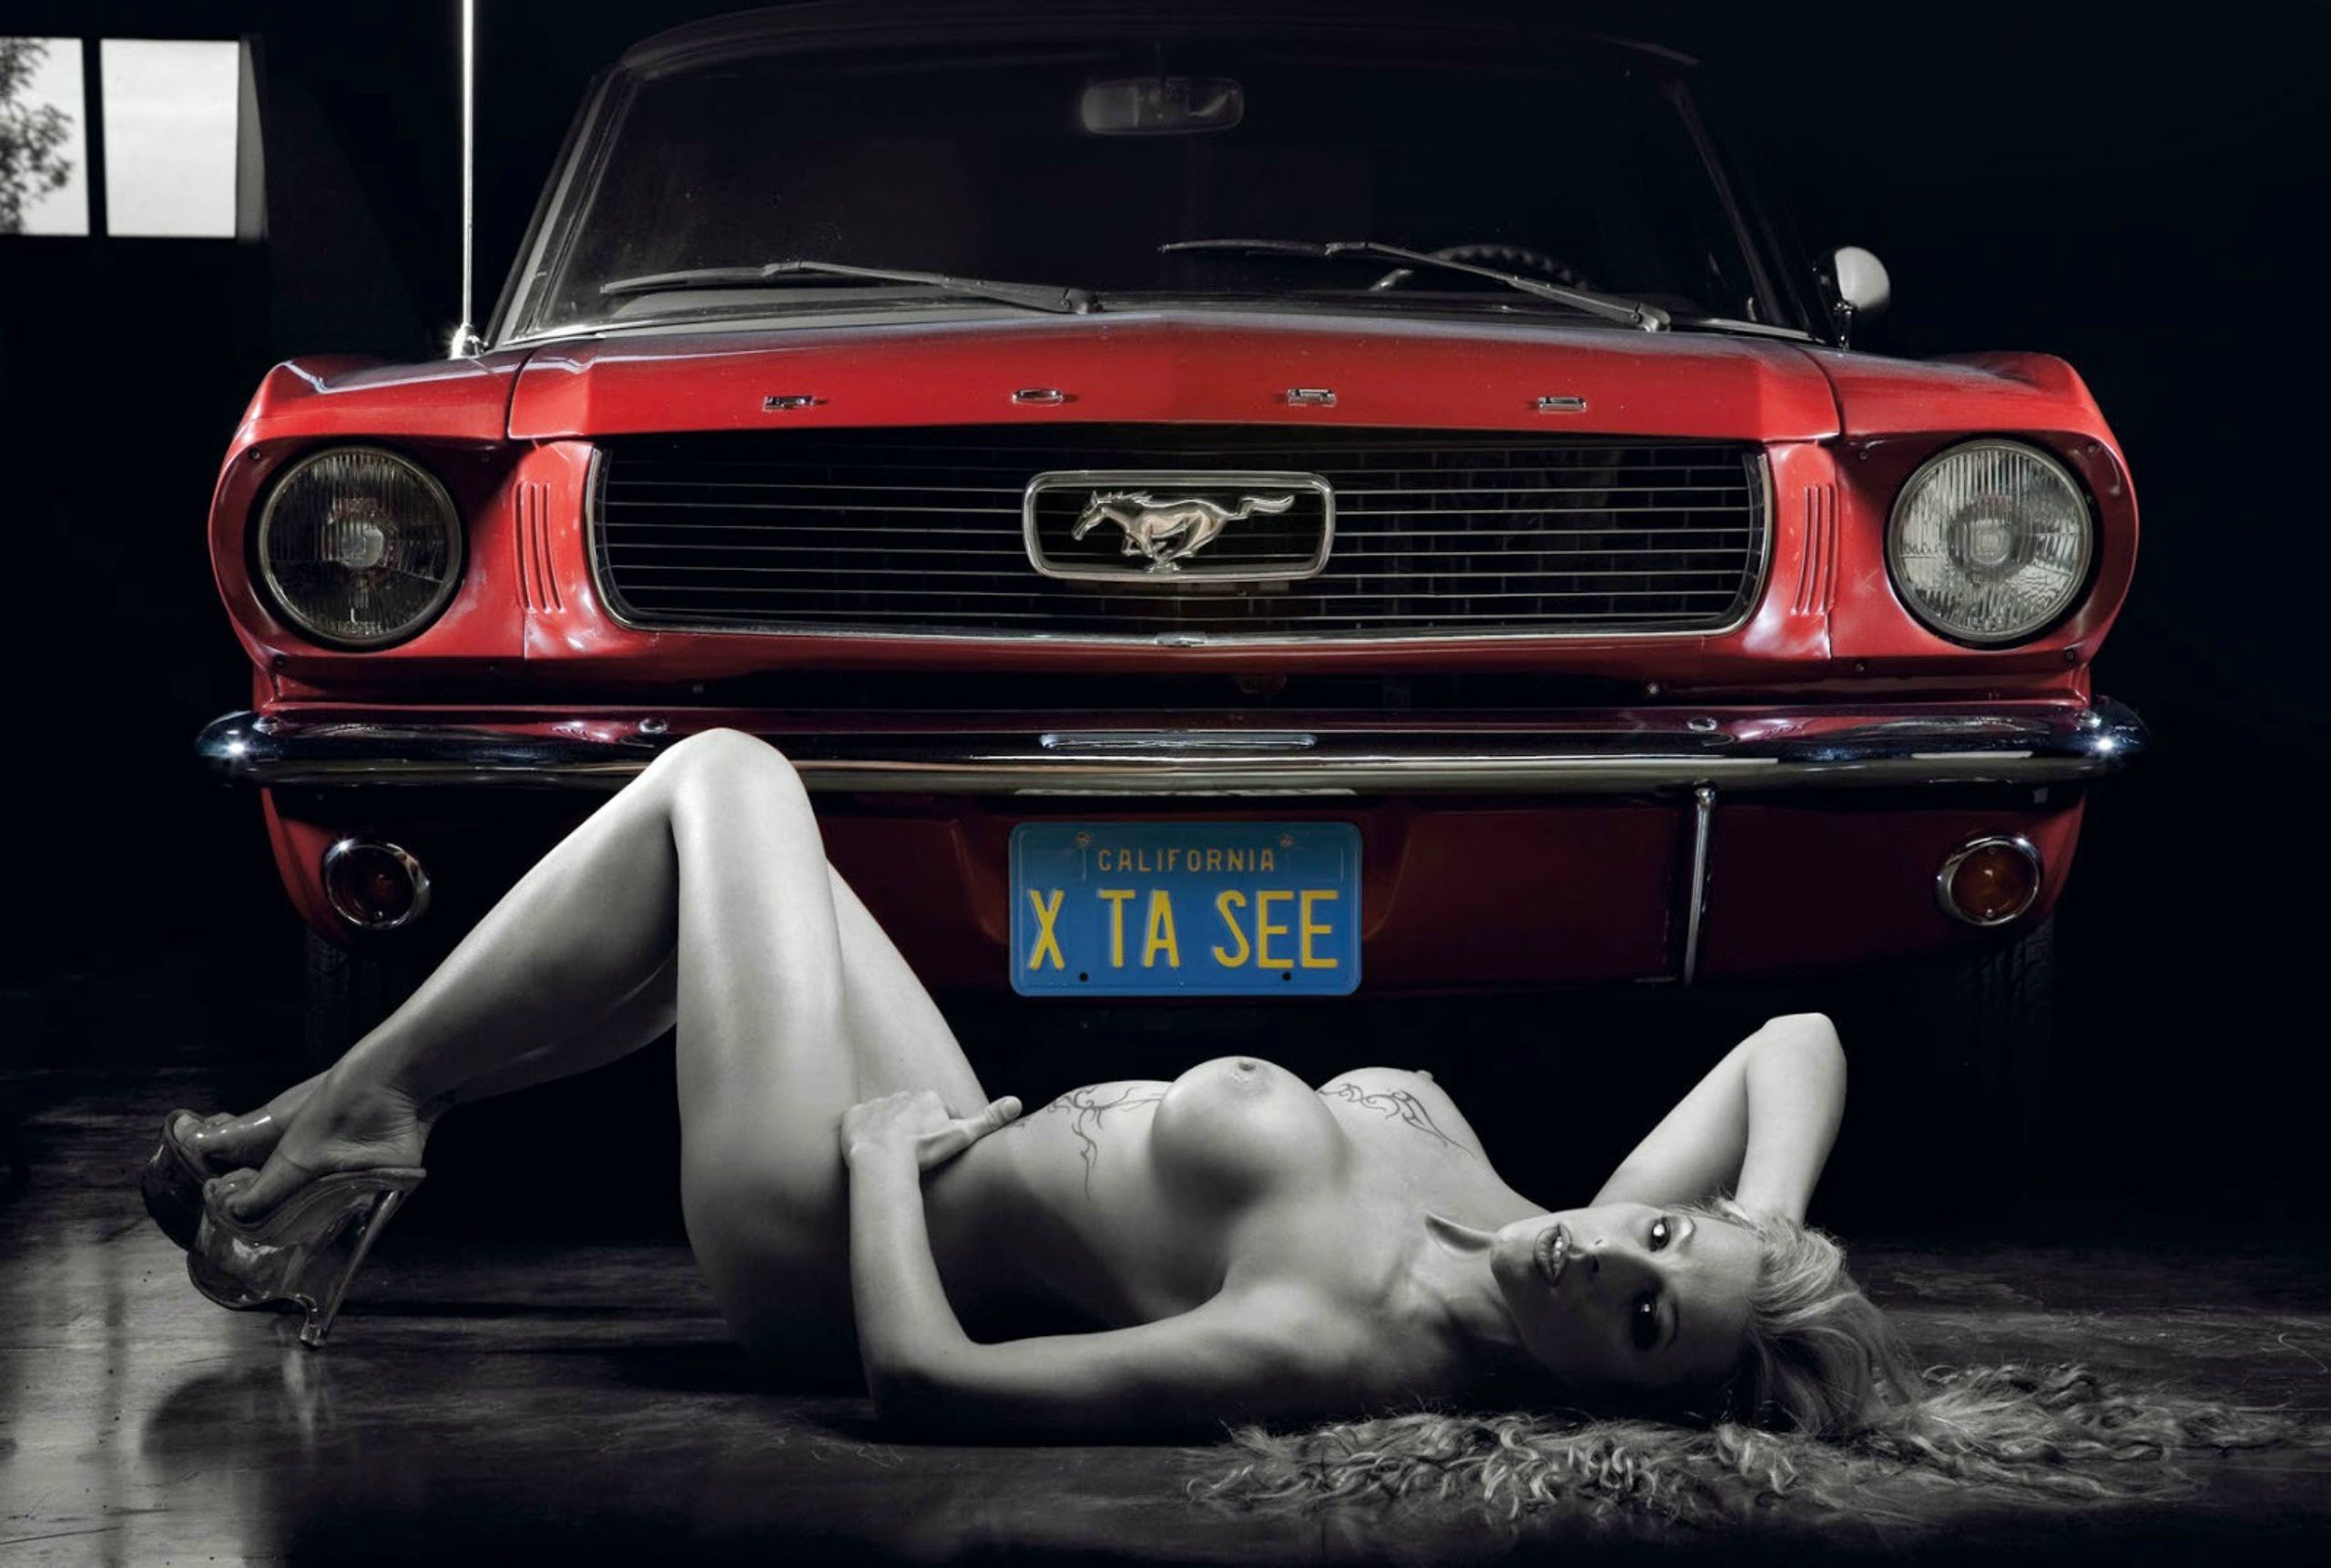 Apple P. recomended a Naked chick mustang on